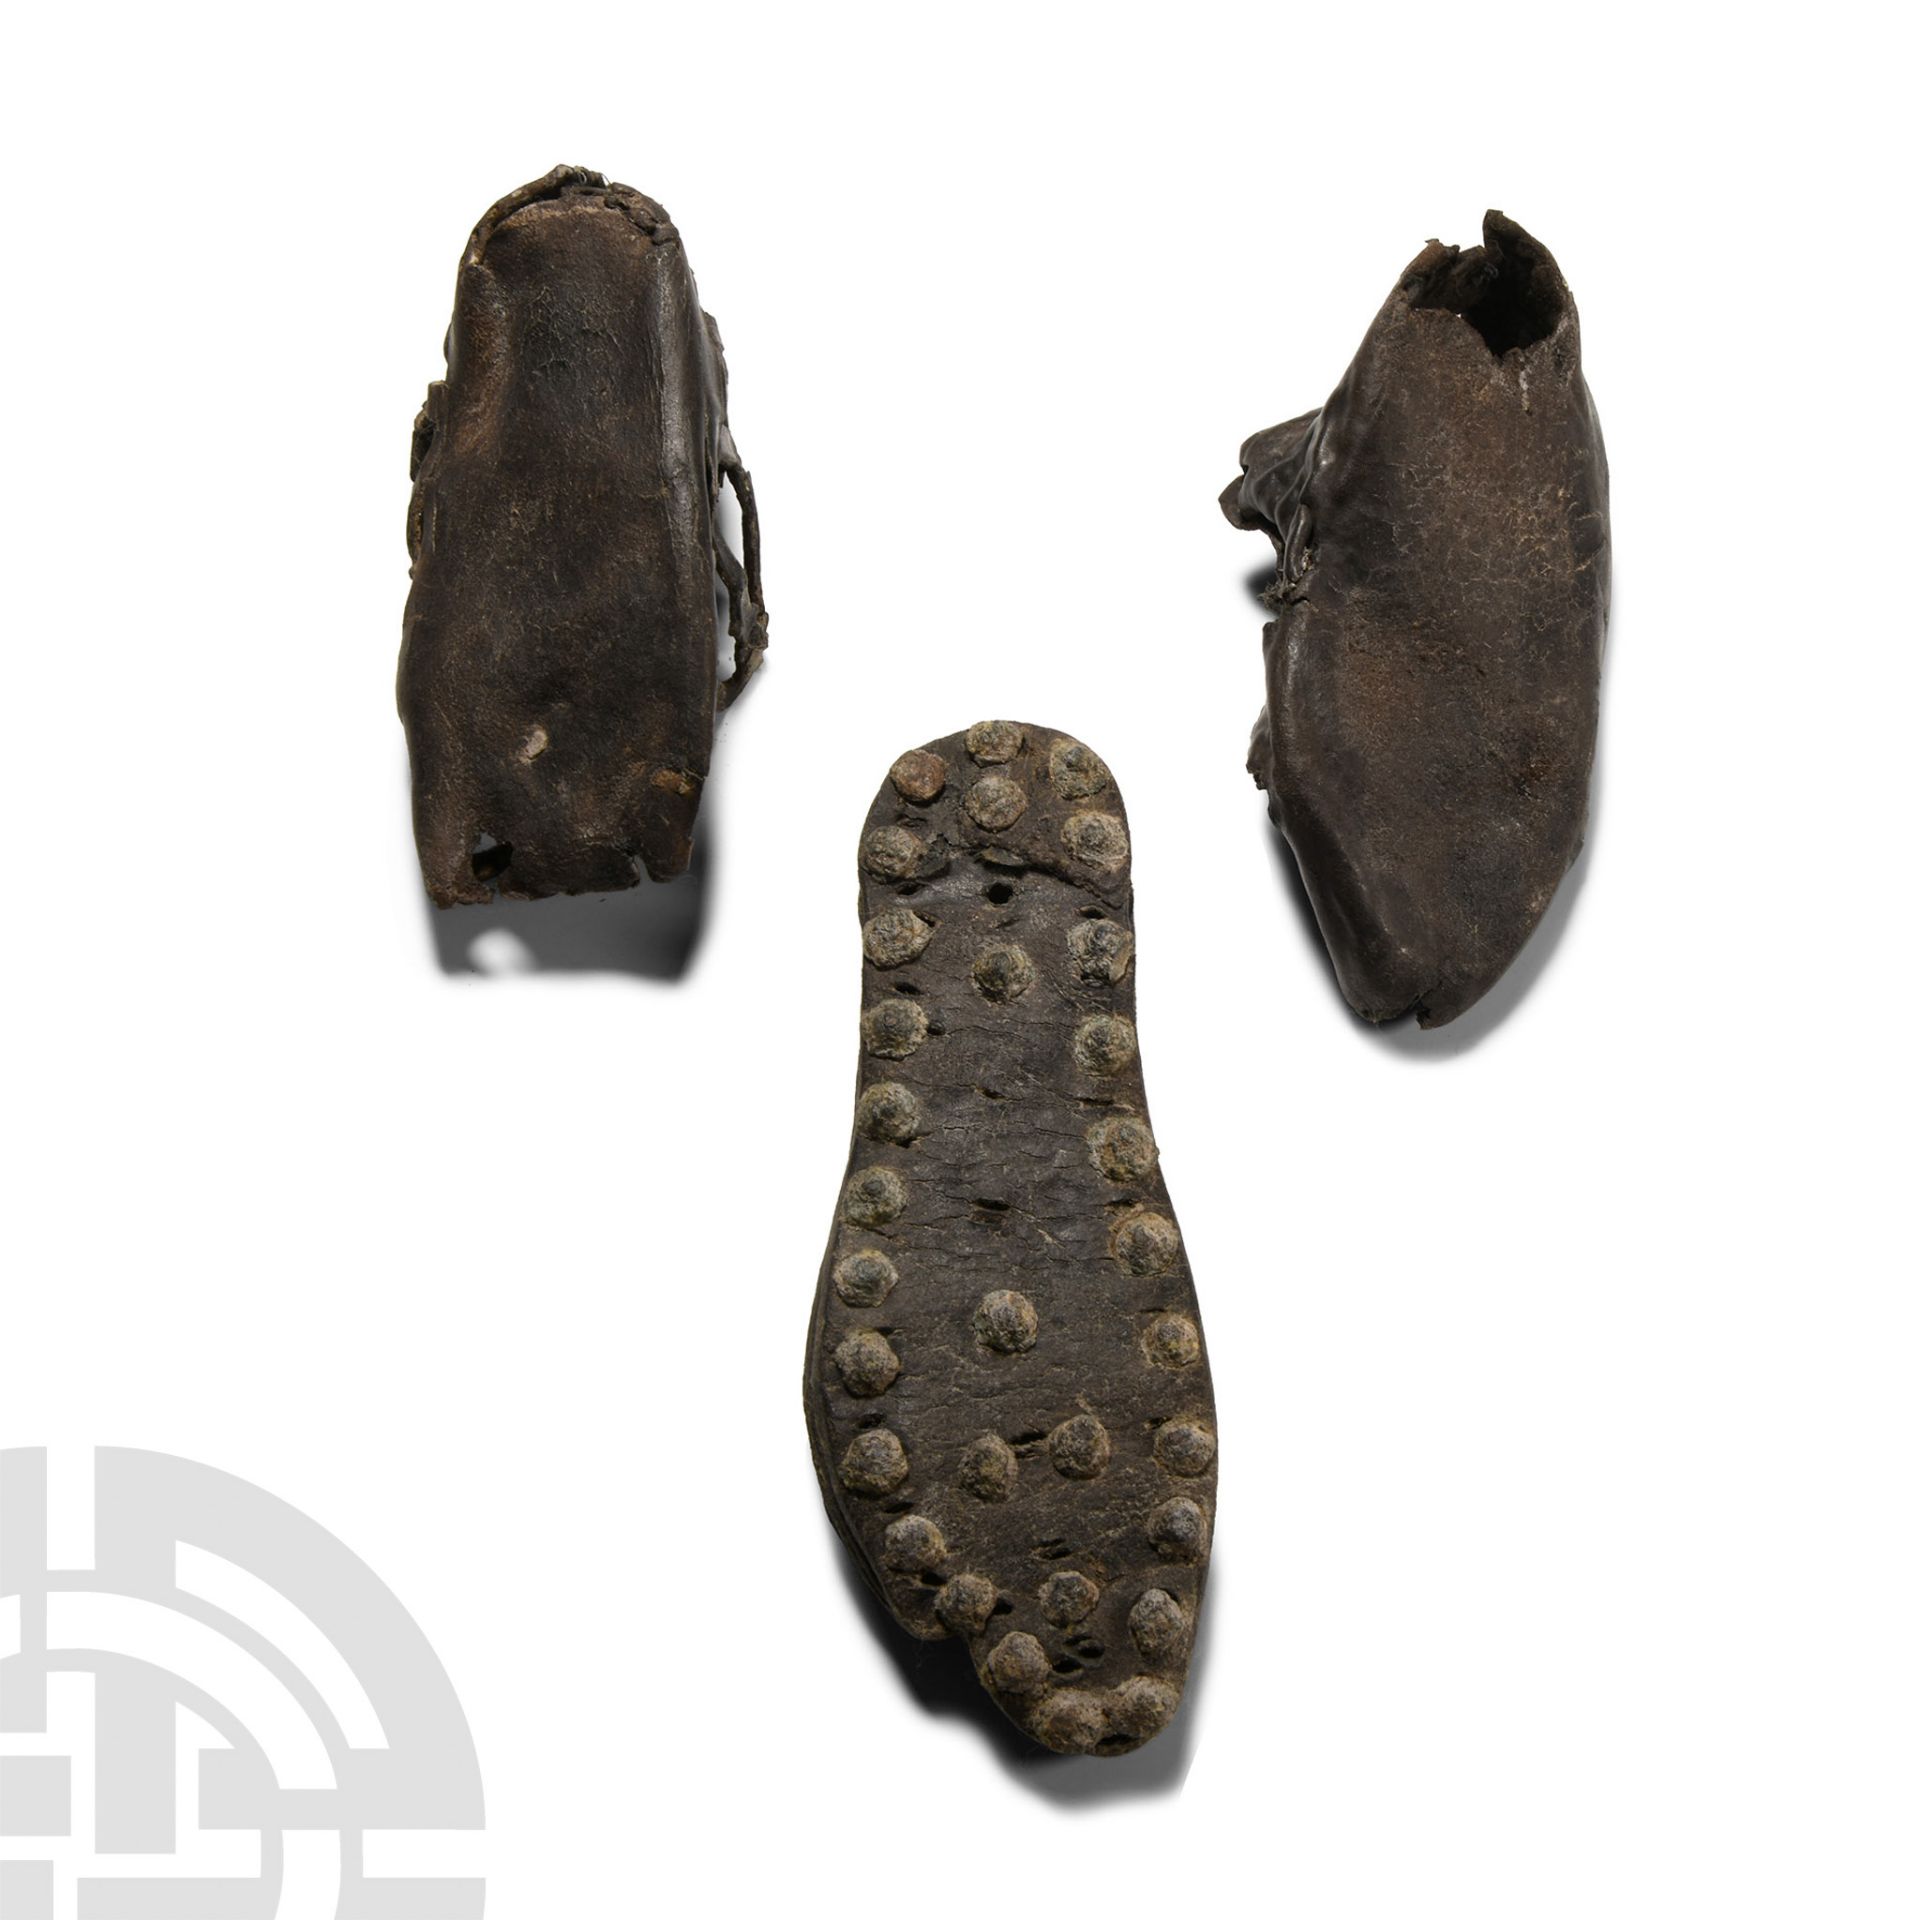 Roman Children's Leather Shoe Collection - Image 2 of 2